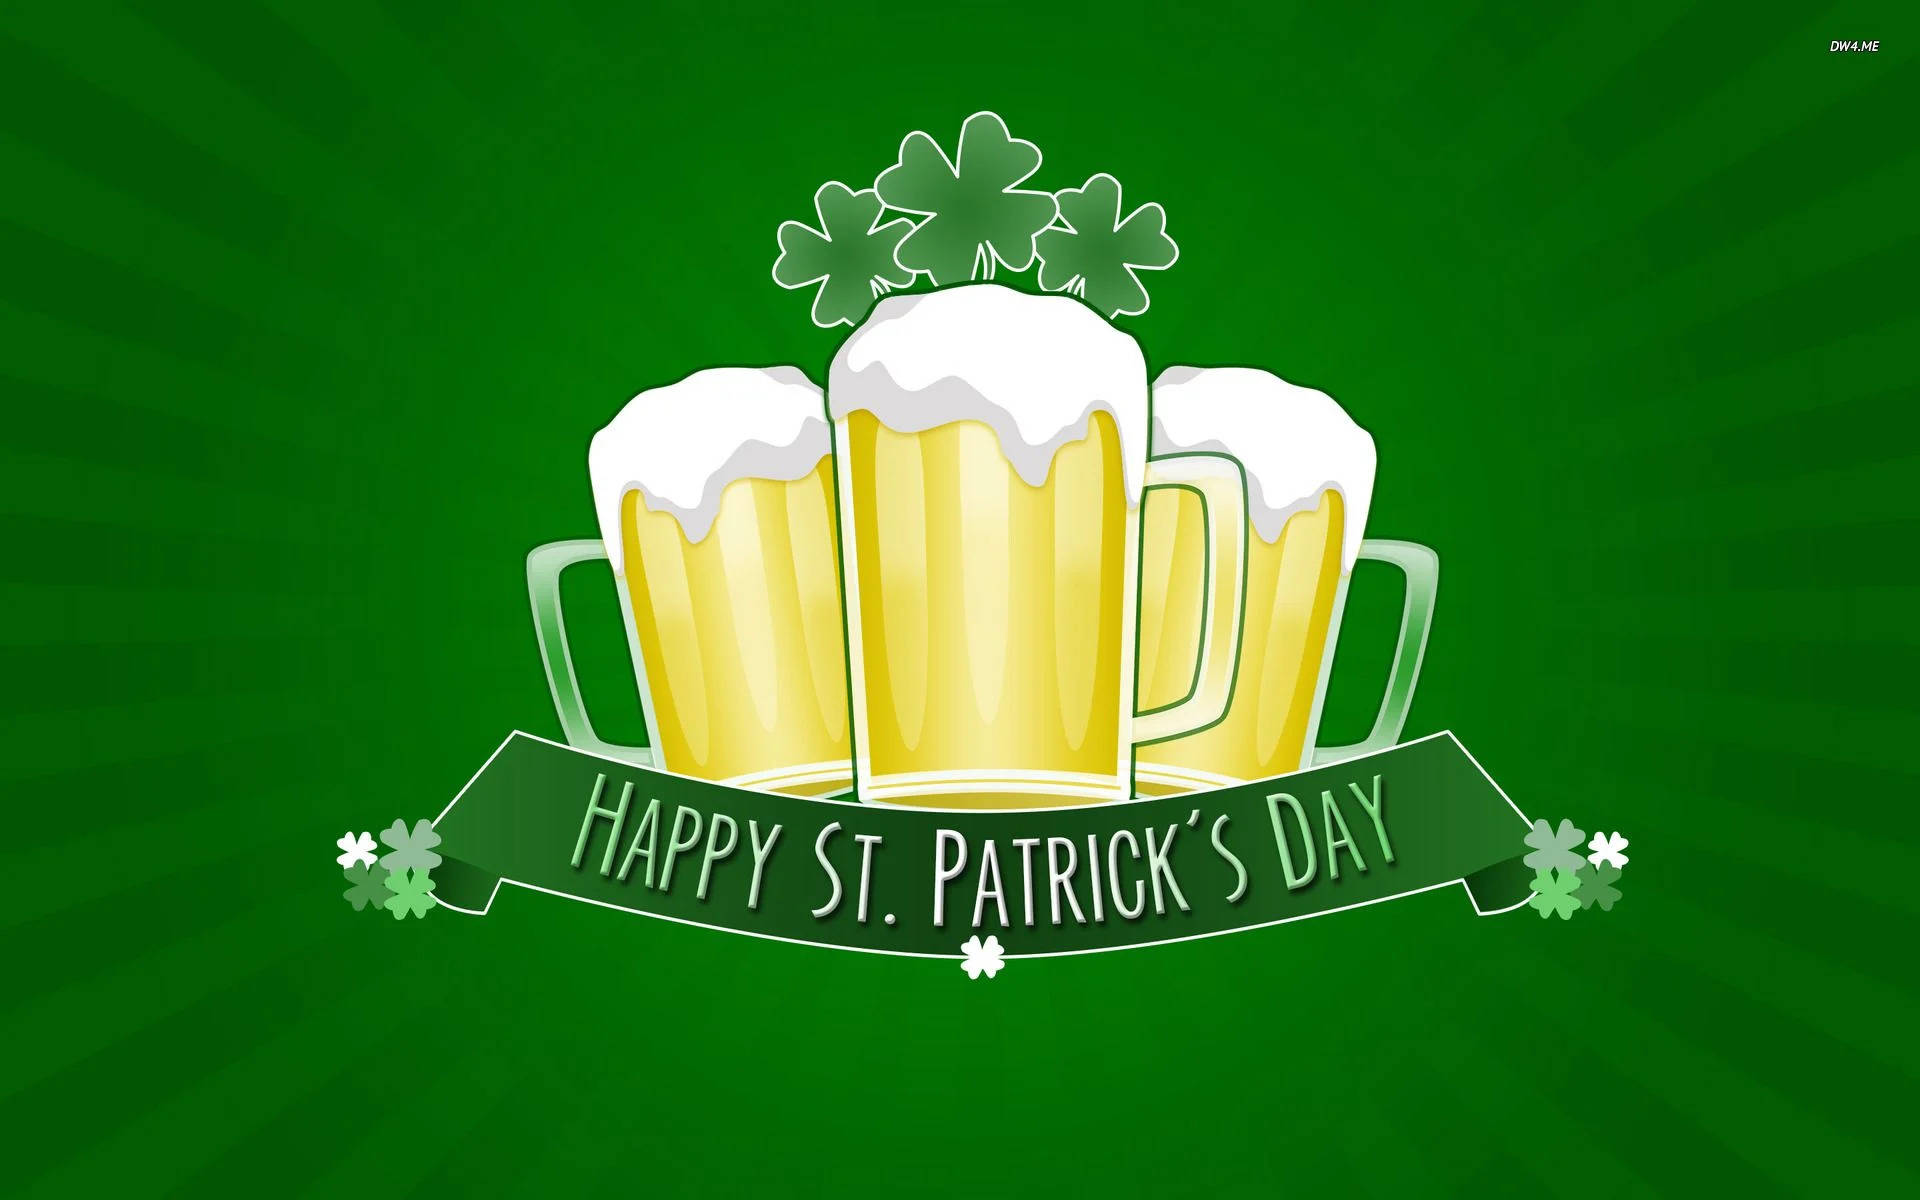 Saint Patrick’s Day With Beer Glasses Background